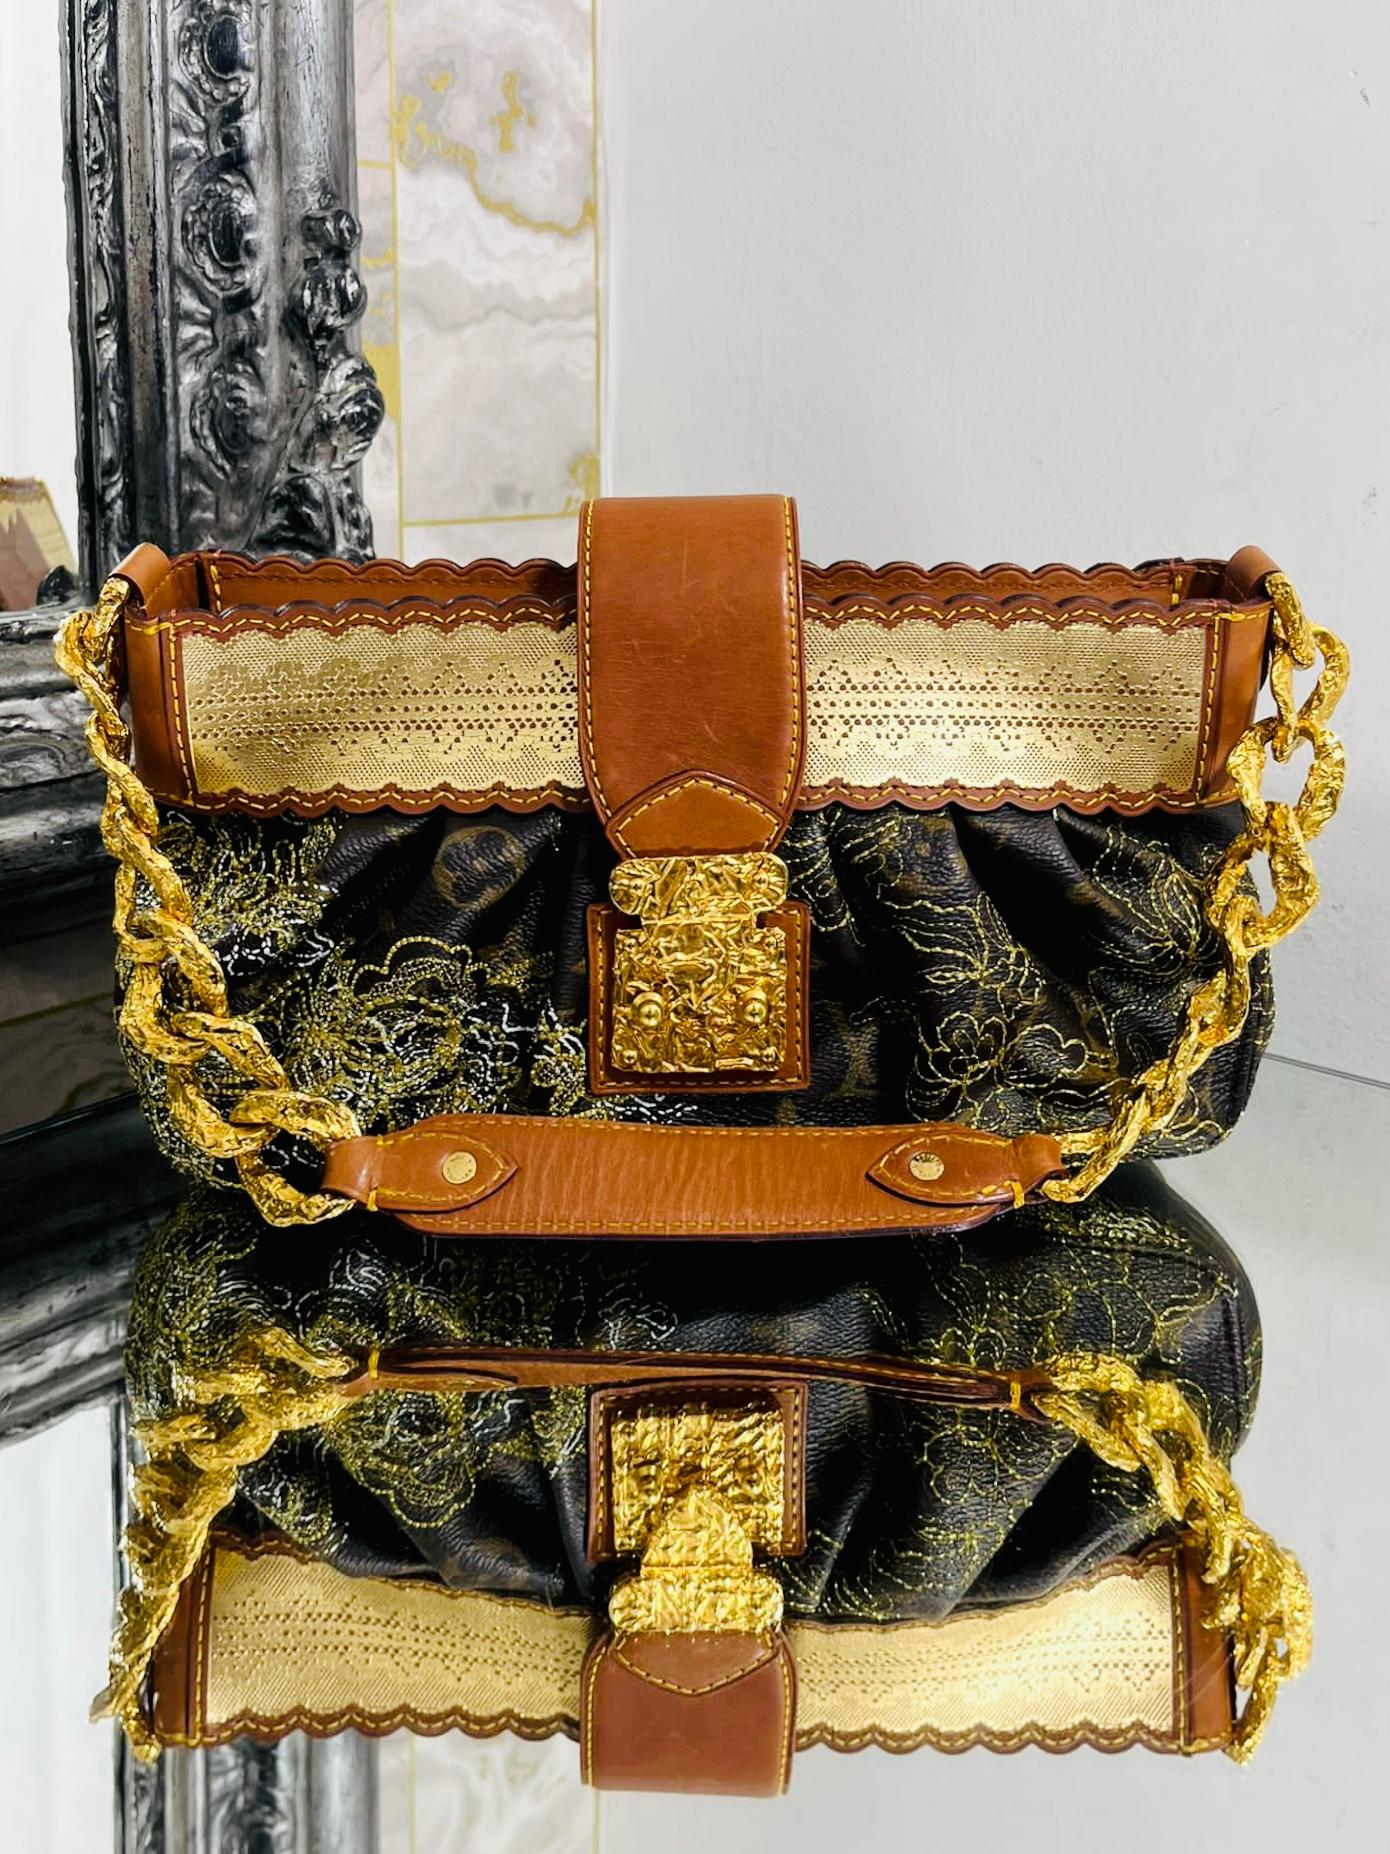 Louis Vuitton Ltd Edition Monogram Dentelle Kirsten Bag

Brown 'LV' logo coated canvas, with a delicate lurex lace trim in gold.

Embroidered metallic gold thread in a floral pattern to the body of the bag.

Chunky gold chain strap and hardware.